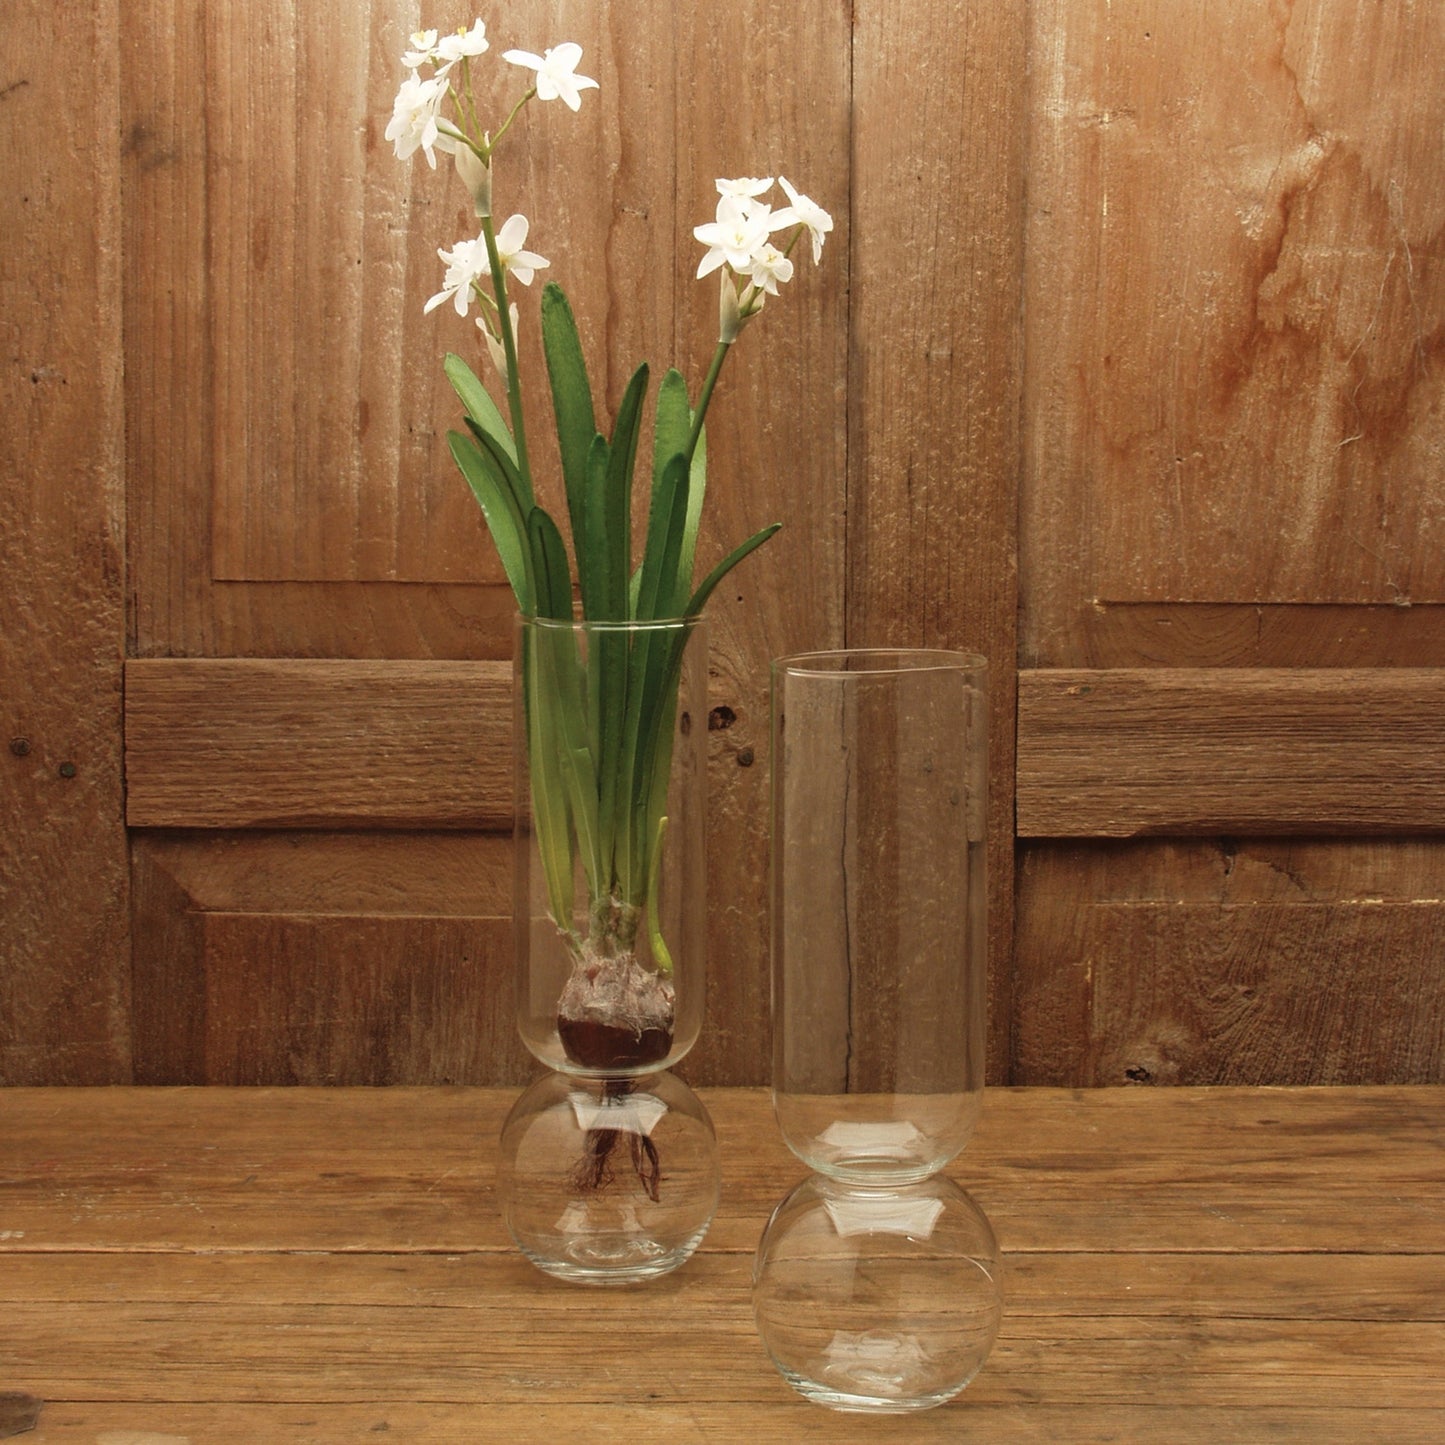 Pair of clear rooting bulb vases with paper white flower bulb on wooden background